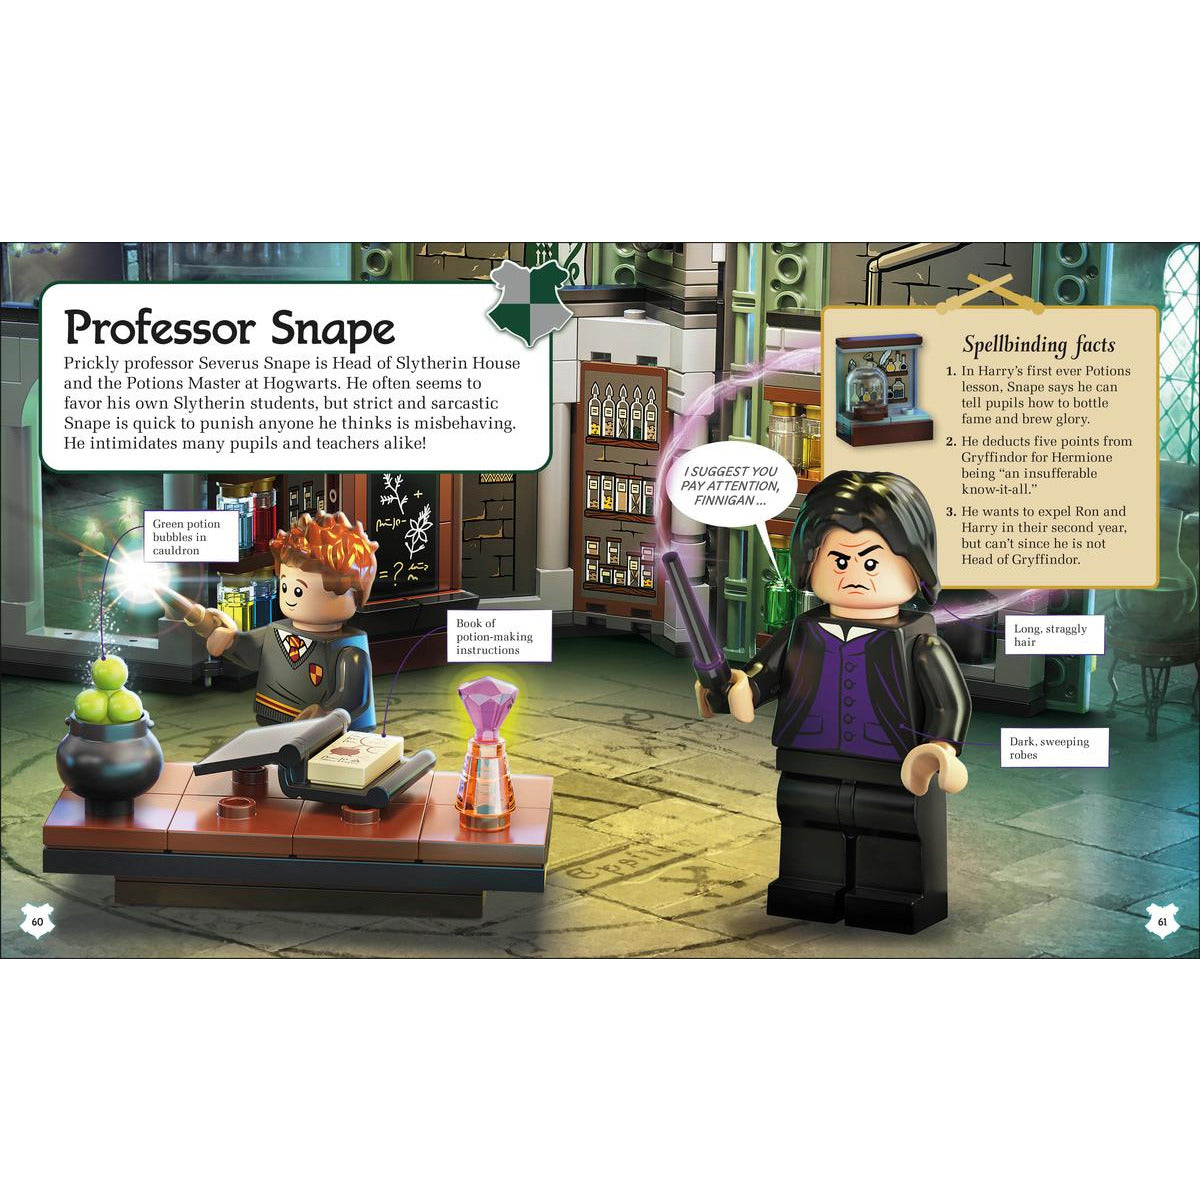 Lego Harry Potter A Spellbinding Guide To Hogwarts Houses - By